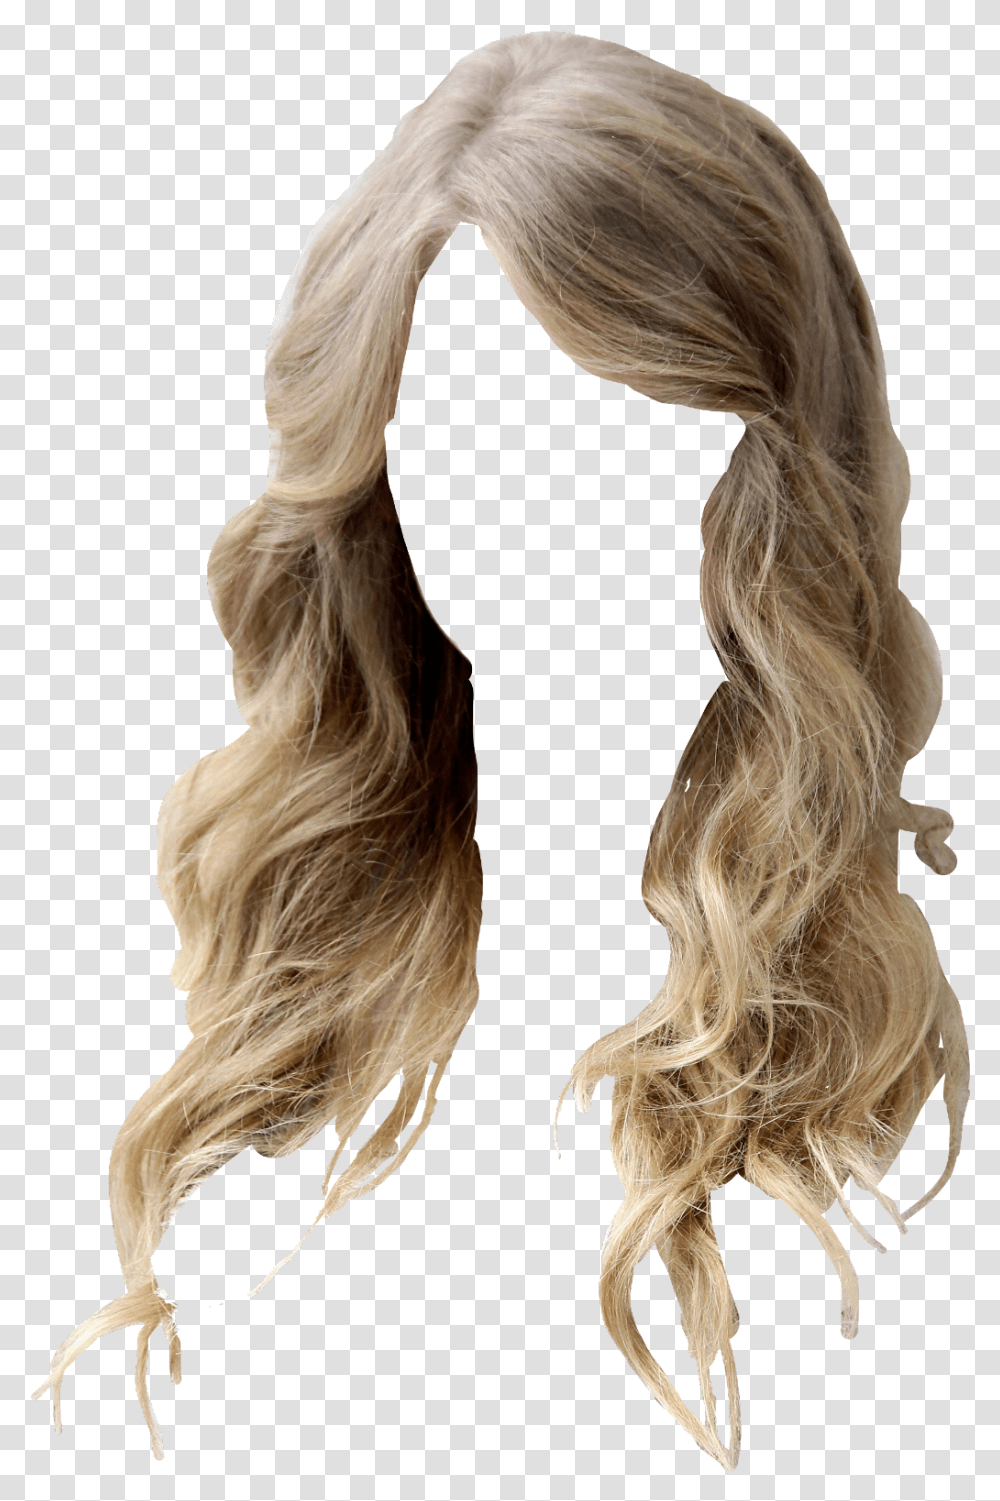 Taylor Swift Taylorswift Hair Blonde Curly Wavy Taylor Swift Poetic Quotes, Person, Human, Ponytail, Wig Transparent Png